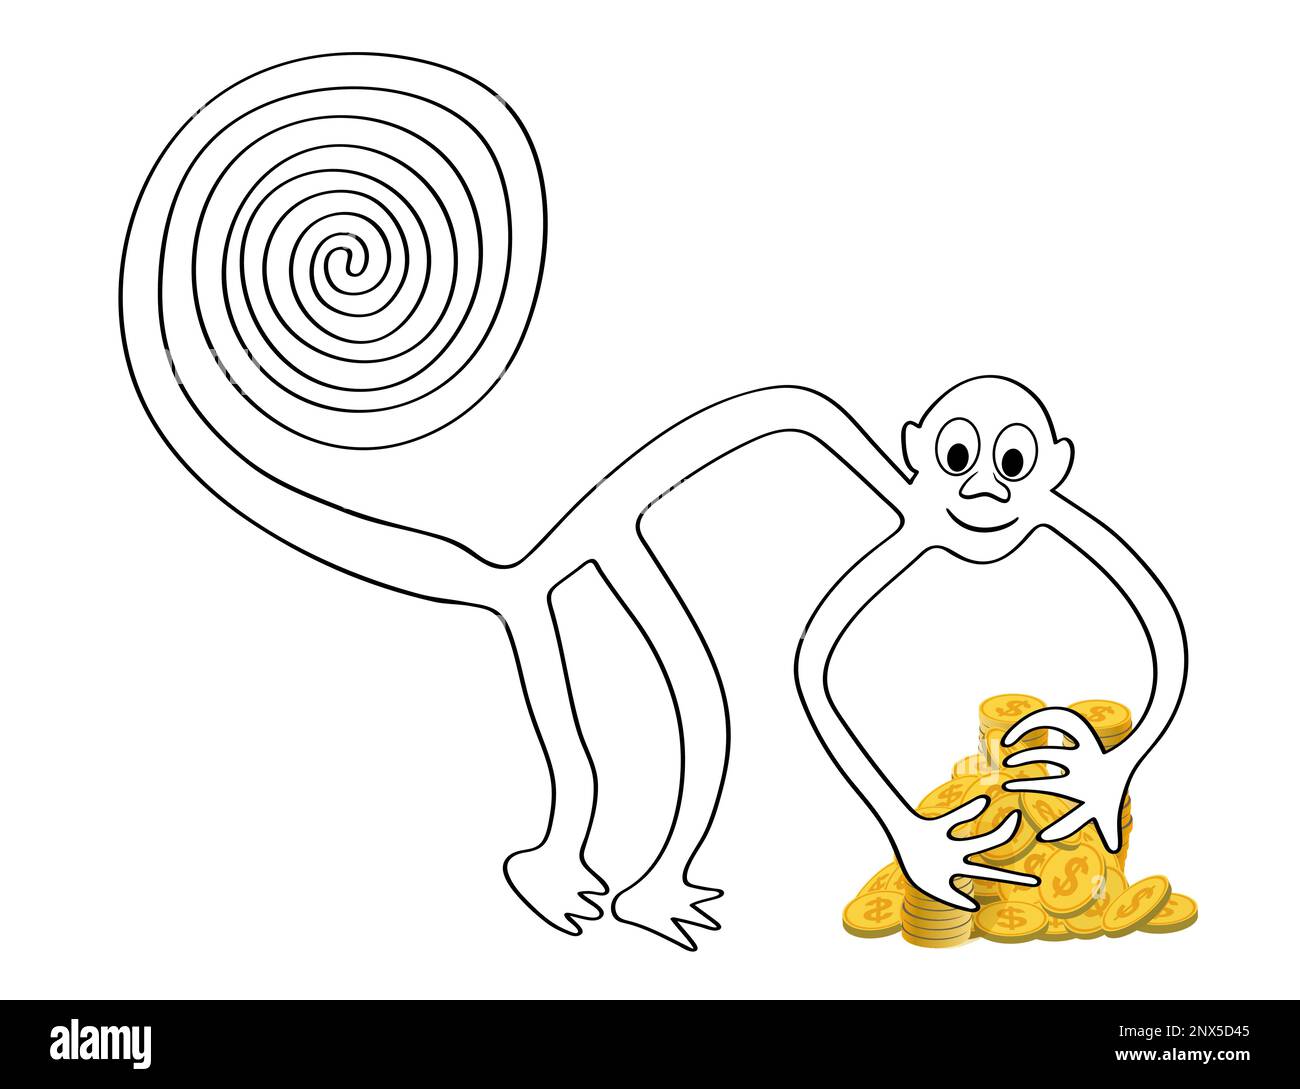 Monkey with a pile of golden coins - a paraphrase of the famous geoglyph The Monkey from Nazca, Nazca desert, Peru Stock Vector